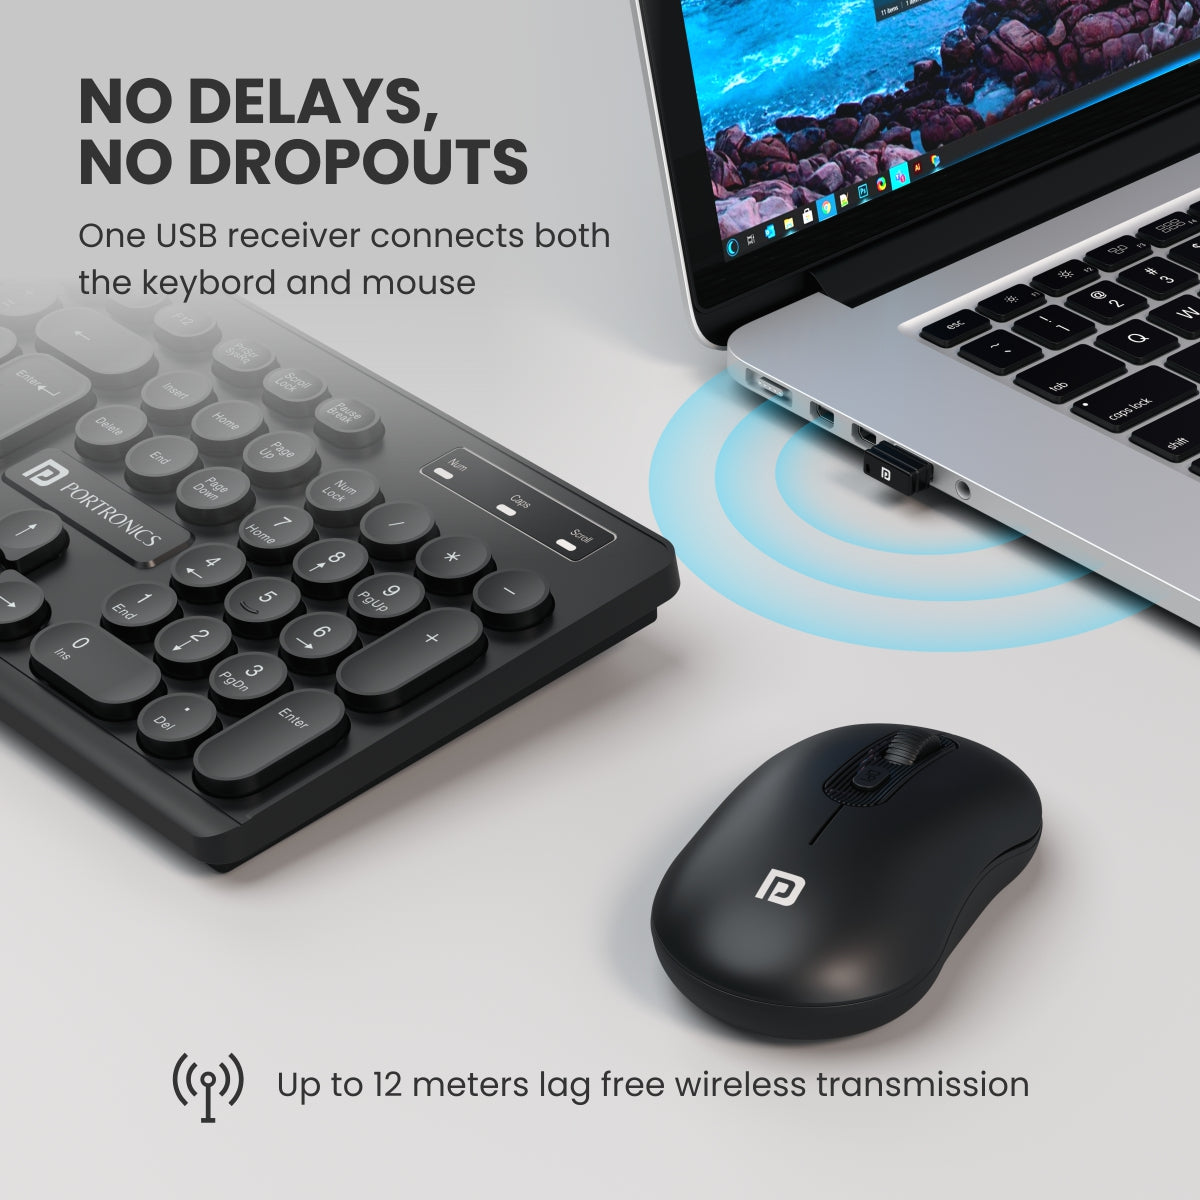 Black Portronics Key6  Wireless Mouse and Keyboard compact in size|  Wireless keyboard for desktop at online